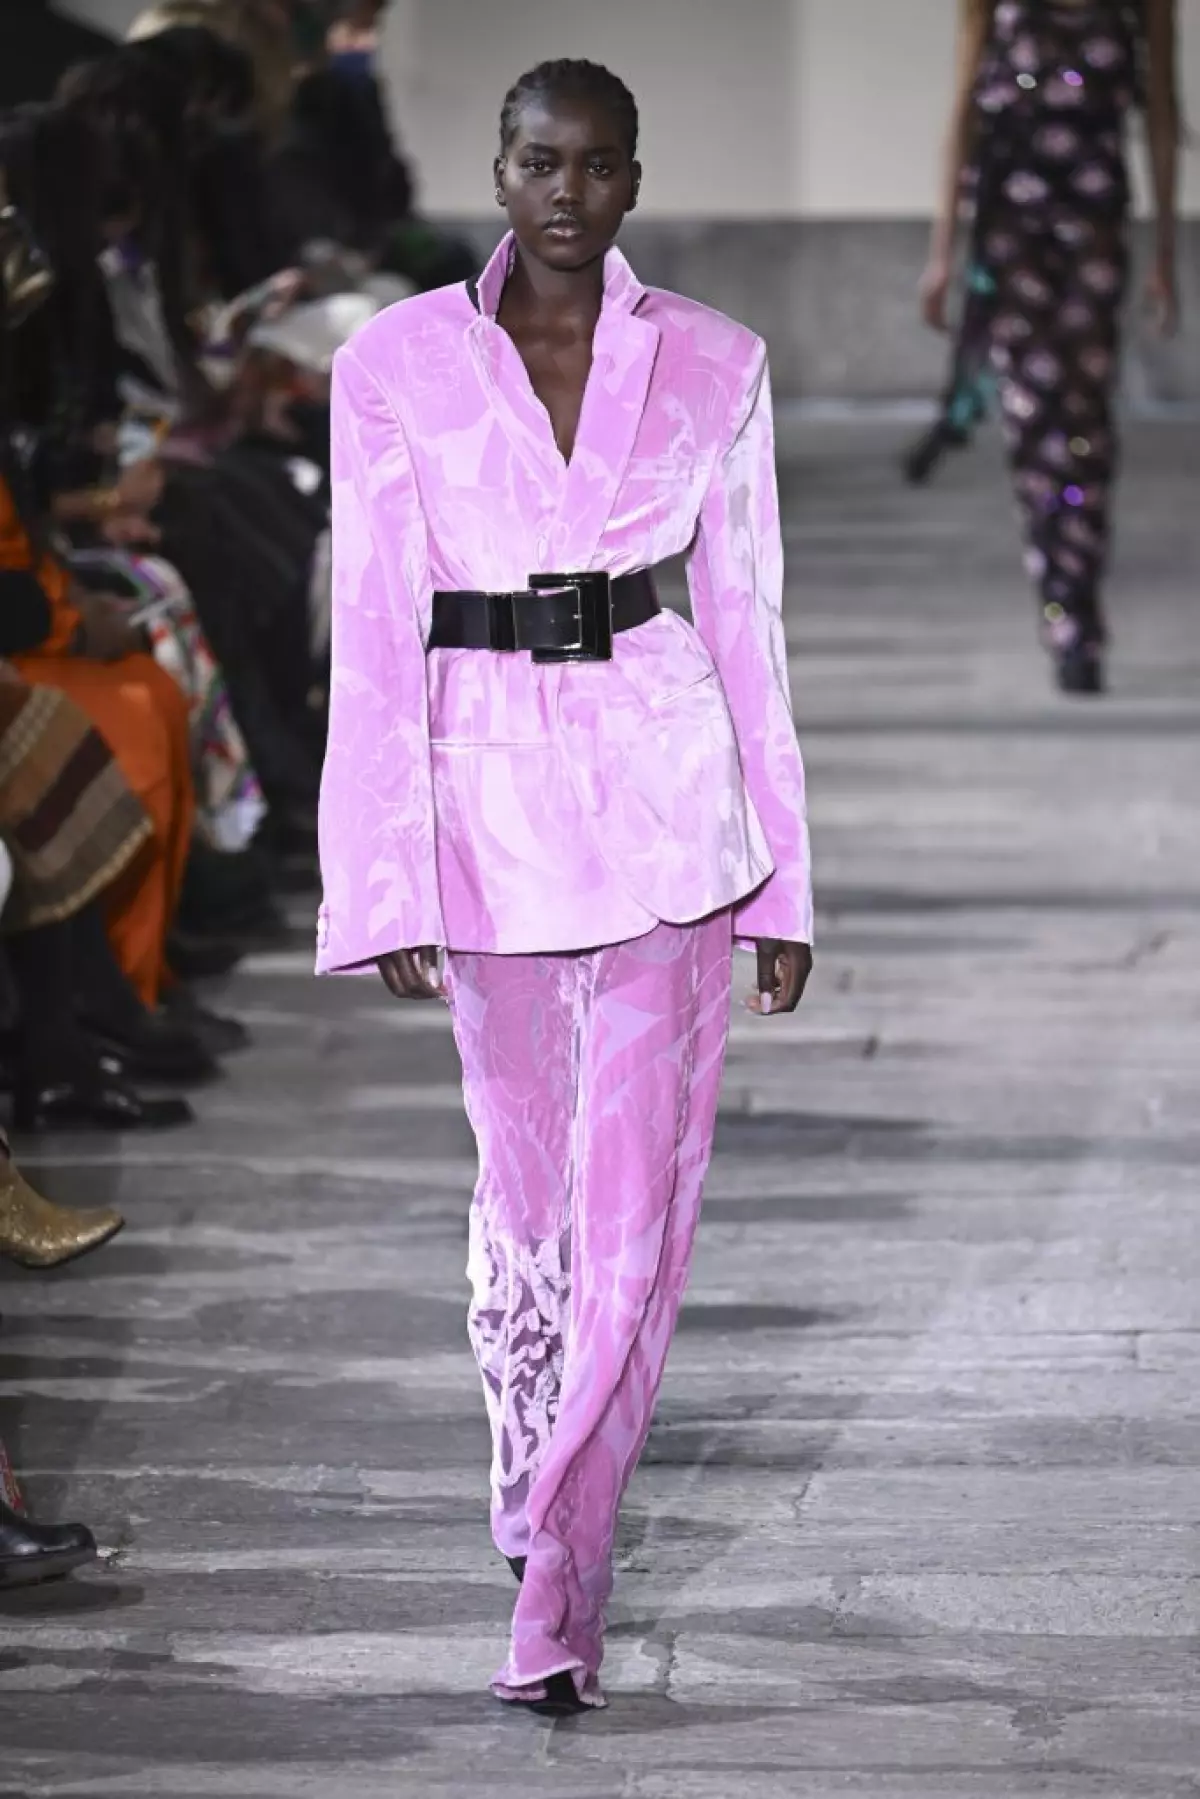 Adut Akech walks the runway during the Etro Ready to Wear Fall/Winter 2022-2023 fashion show